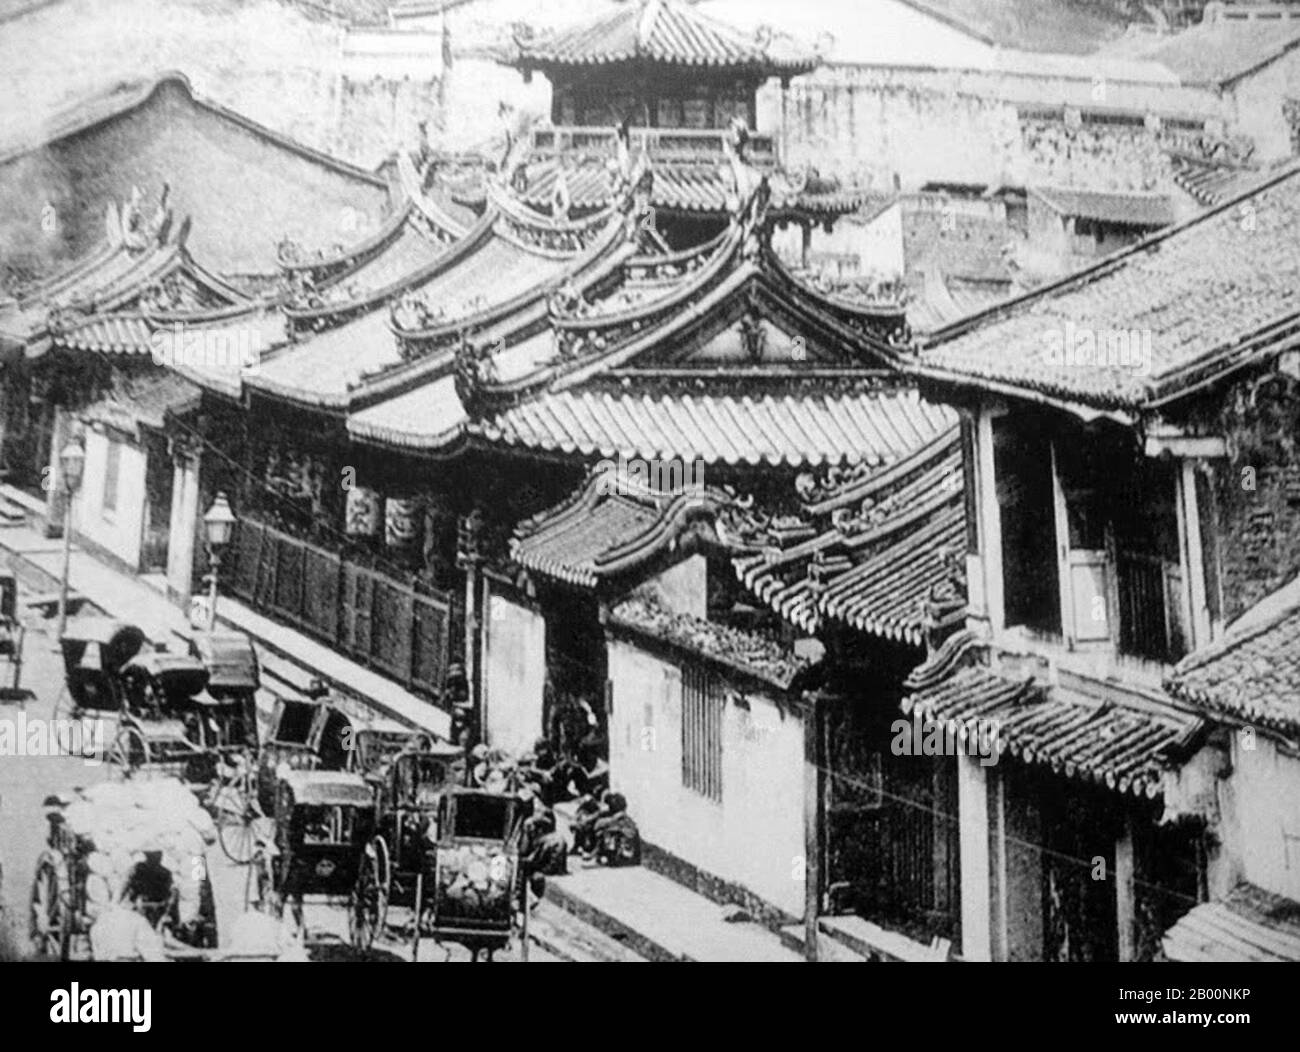 Singapore: Detail of Chinatown in the late 19th century.  Singapore hosted a trading post of the East India Company in 1819 with permission from the Sultanate of Johor. The British obtained sovereignty over the island in 1824 and Singapore became one of the British Straits Settlements in 1826. Occupied by the Japanese in World War II, Singapore declared independence, uniting with other former British territories to form Malaysia in 1963, although it was separated from Malaysia two years later. Since then it has had a massive increase in wealth, and is one of the Four Asian Tigers. Stock Photo